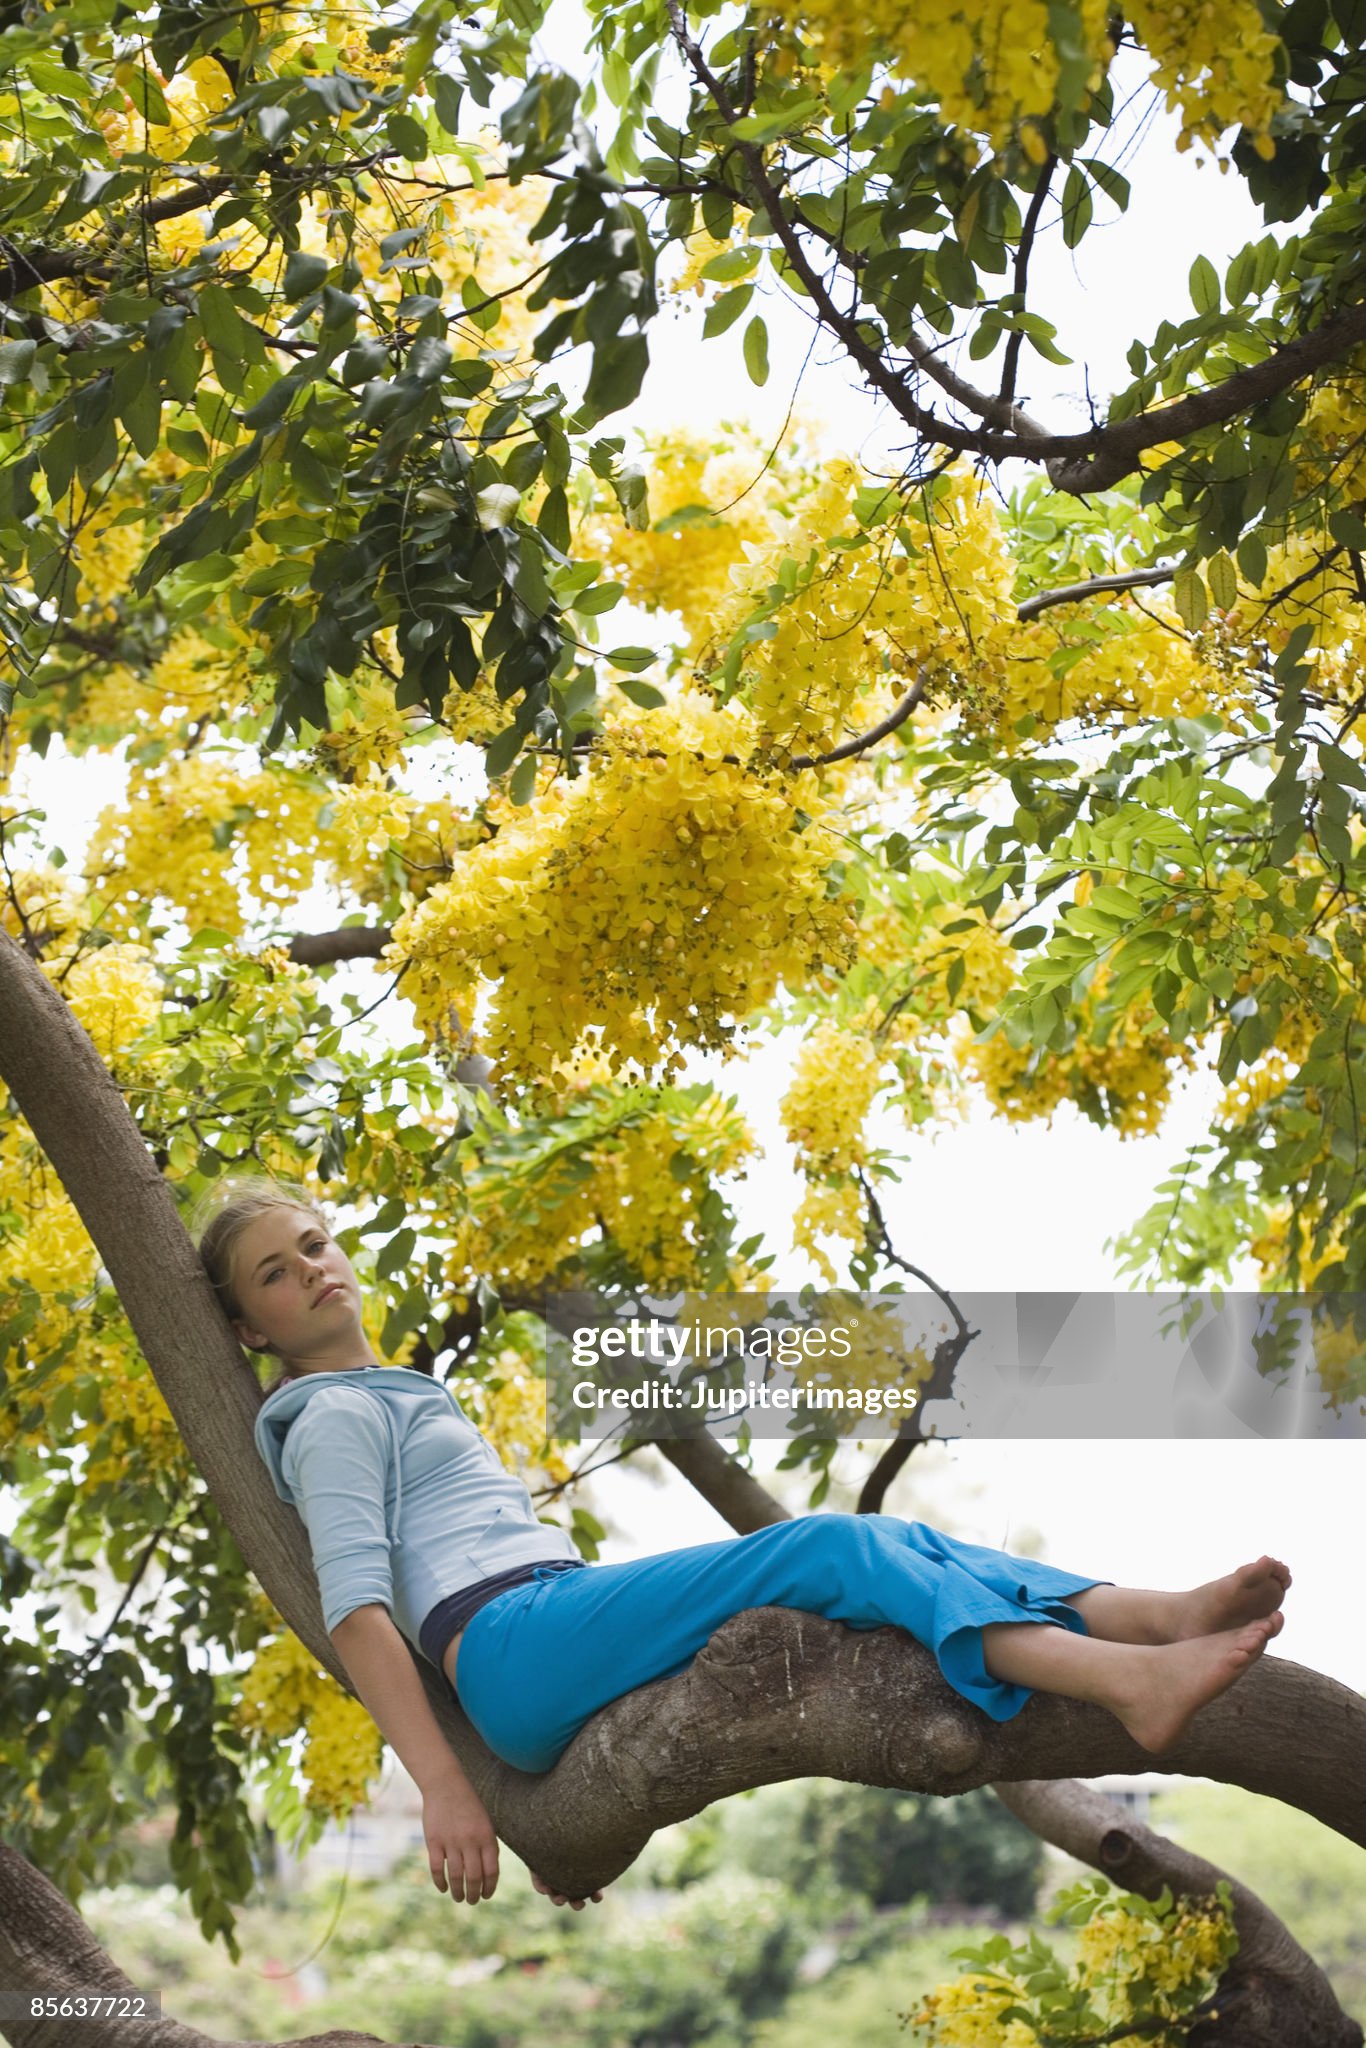 https://media.gettyimages.com/id/85637722/photo/girl-sitting-in-tree.jpg?s=2048x2048&amp;w=gi&amp;k=20&amp;c=Z8SlTd2GAMN_KGeXq2pD4QqjyJ6ltaGohH1_4o1i0FE=